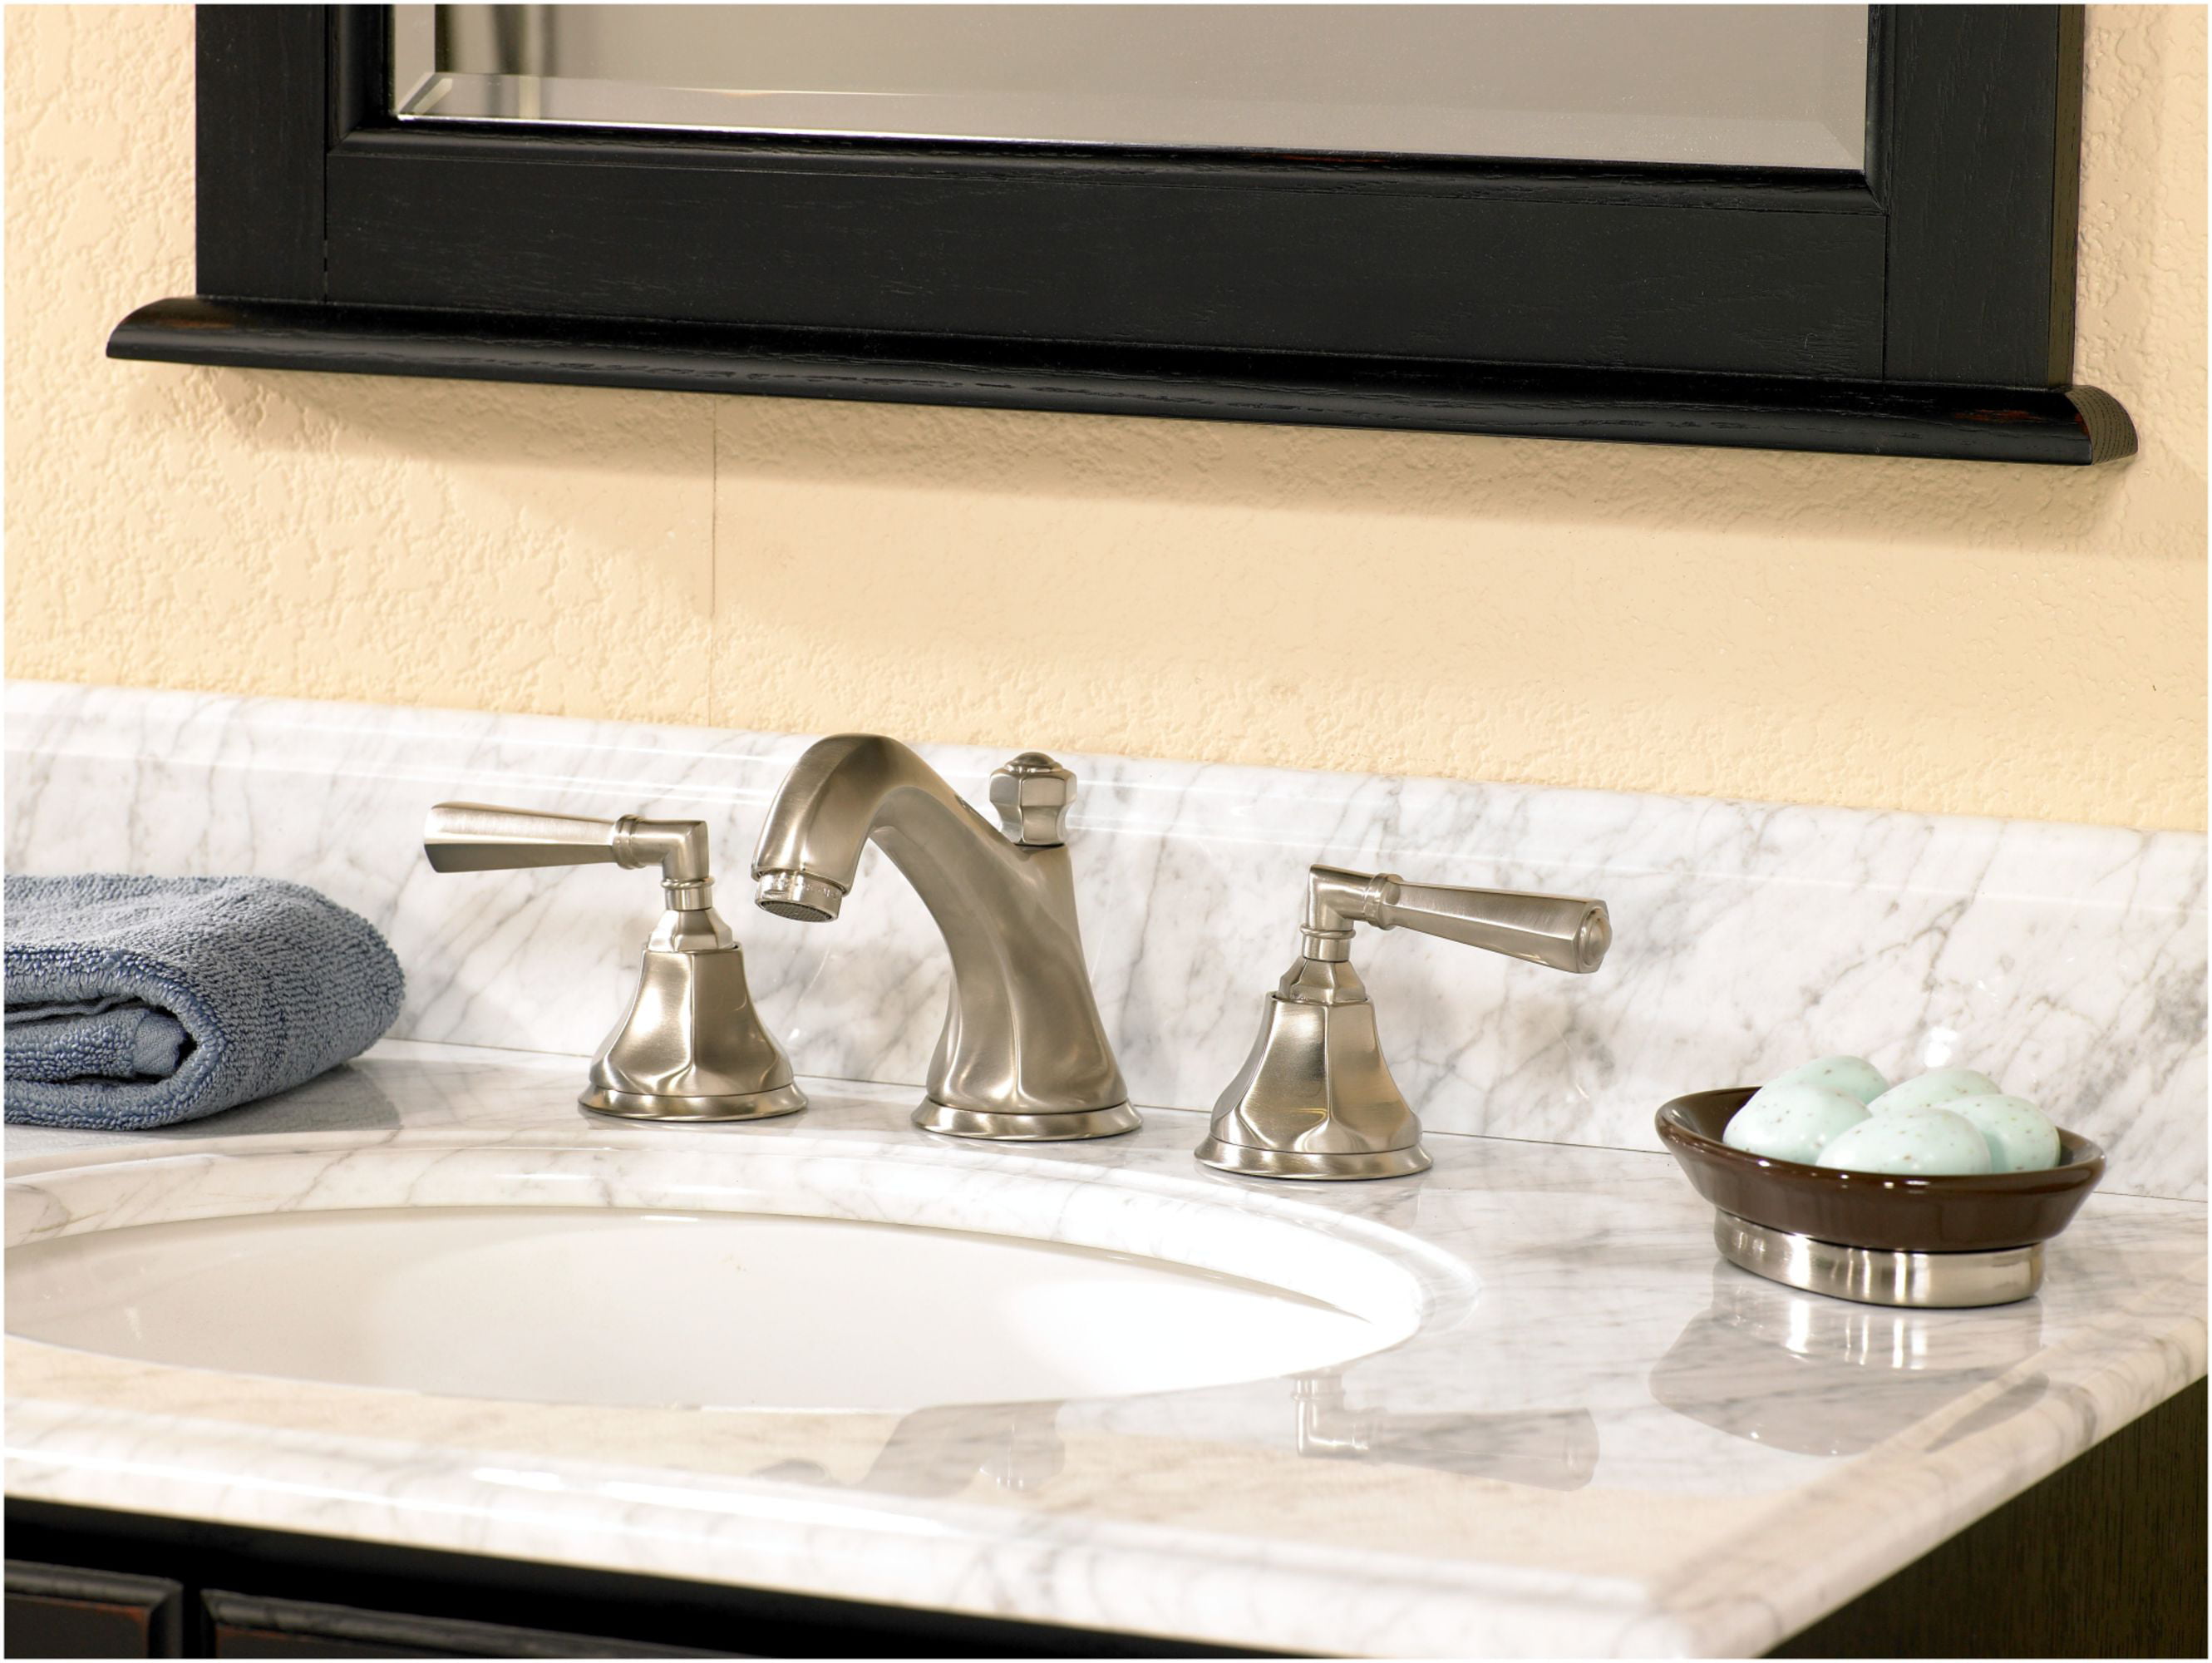 ROHL Miscelo Wallmount Single Handle Lavatory Faucet with Greystone Quarry  Lever Handles in Polished Chrome 並行輸入品 浴室、浴槽、洗面所